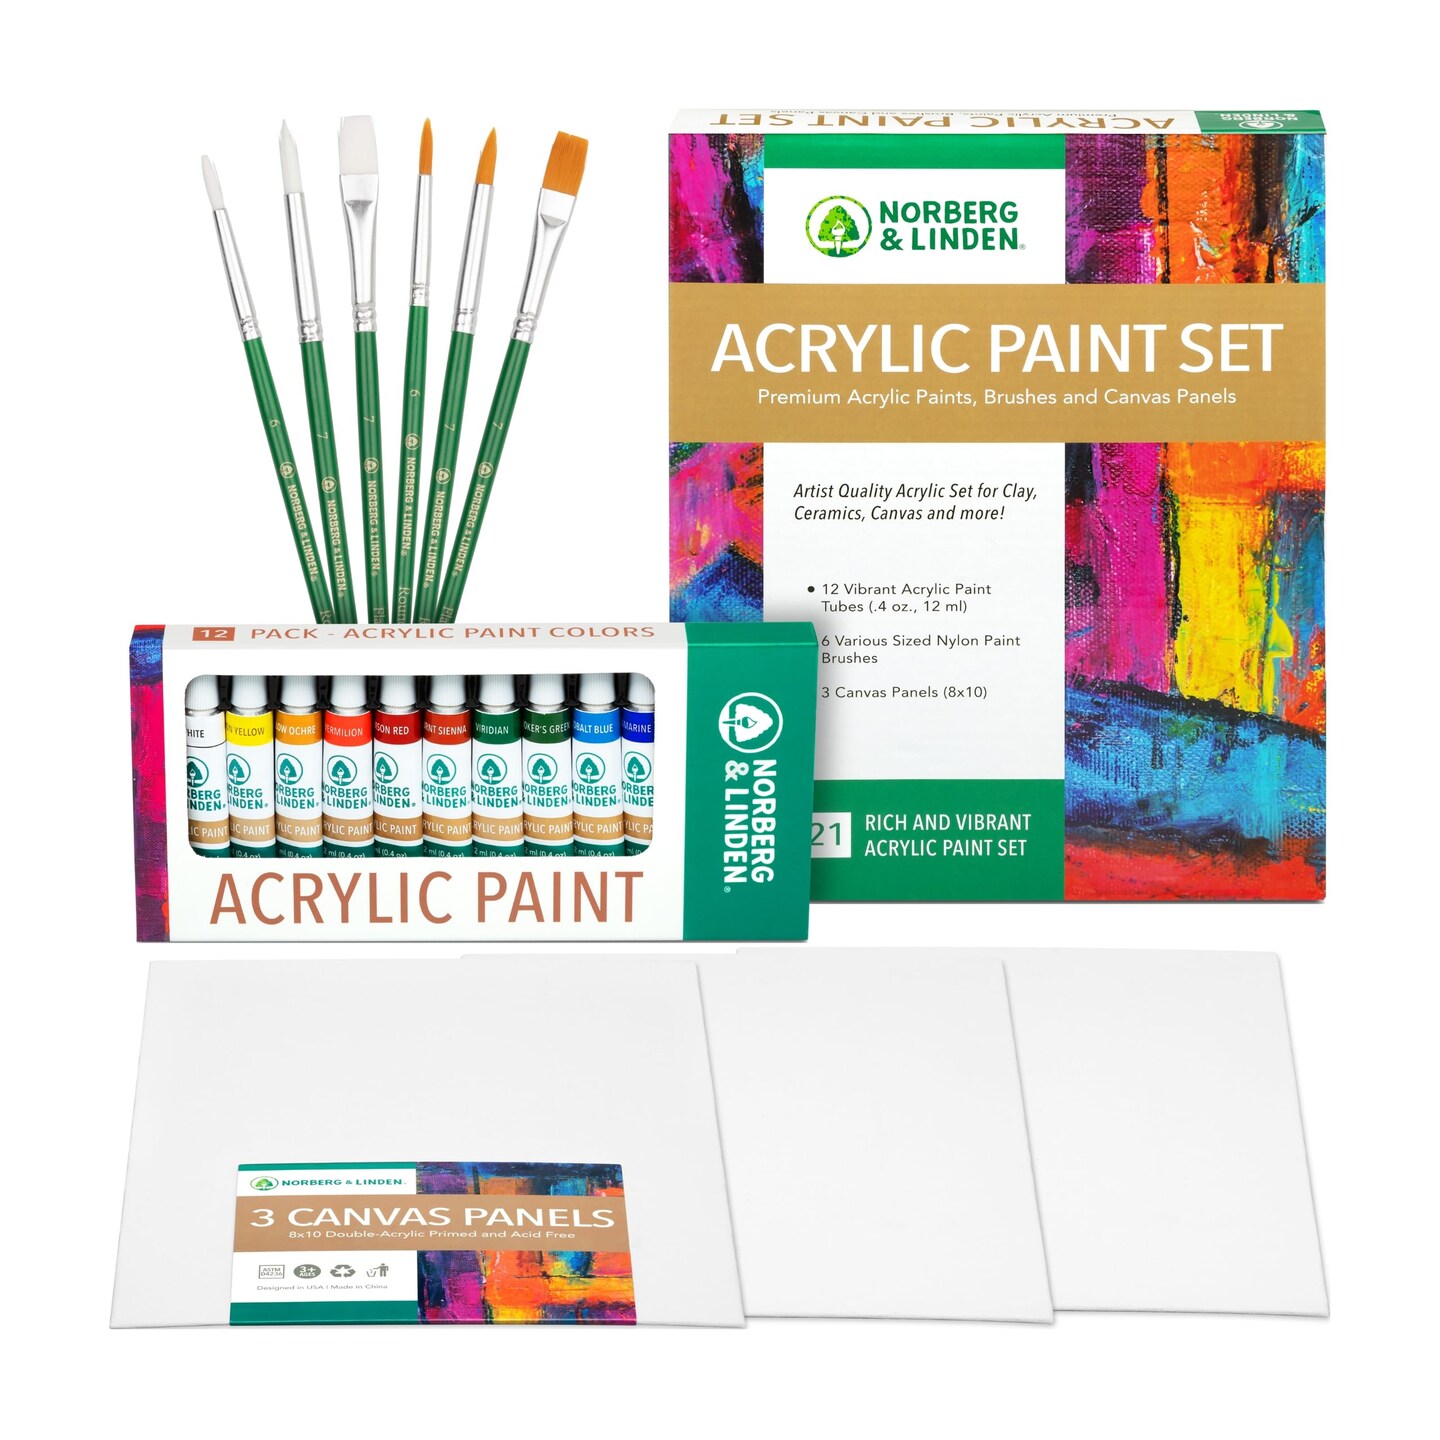 Norberg & Linden Acrylic Paint Set - Canvas and Acrylic Paint Sets